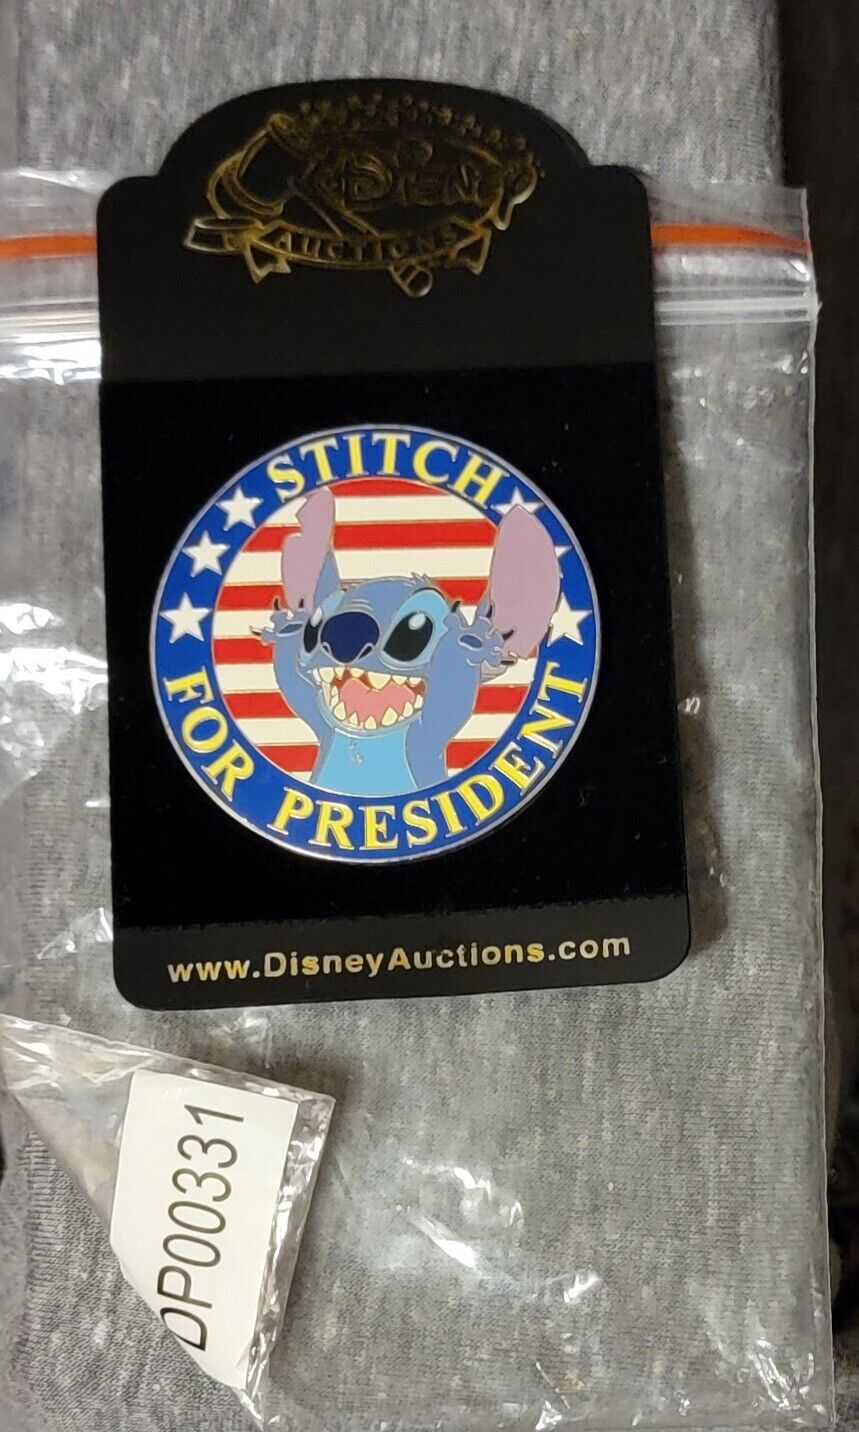 Disney Auctions LILO & STITCH LE 1500 Pin Stitch for President ELECTION DAY PIN